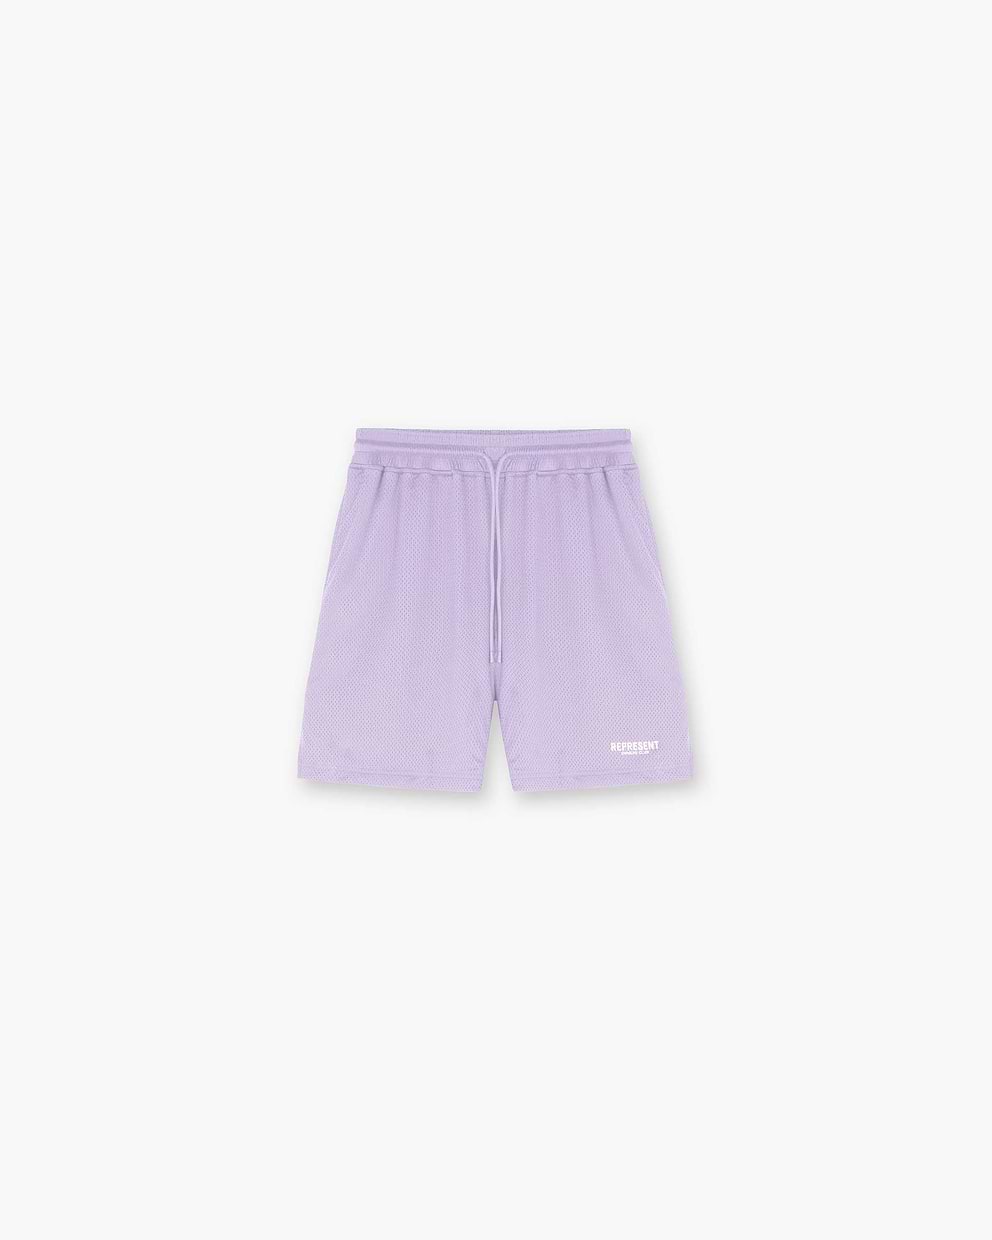 Represent Owners Club Mesh Shorts - Lilac